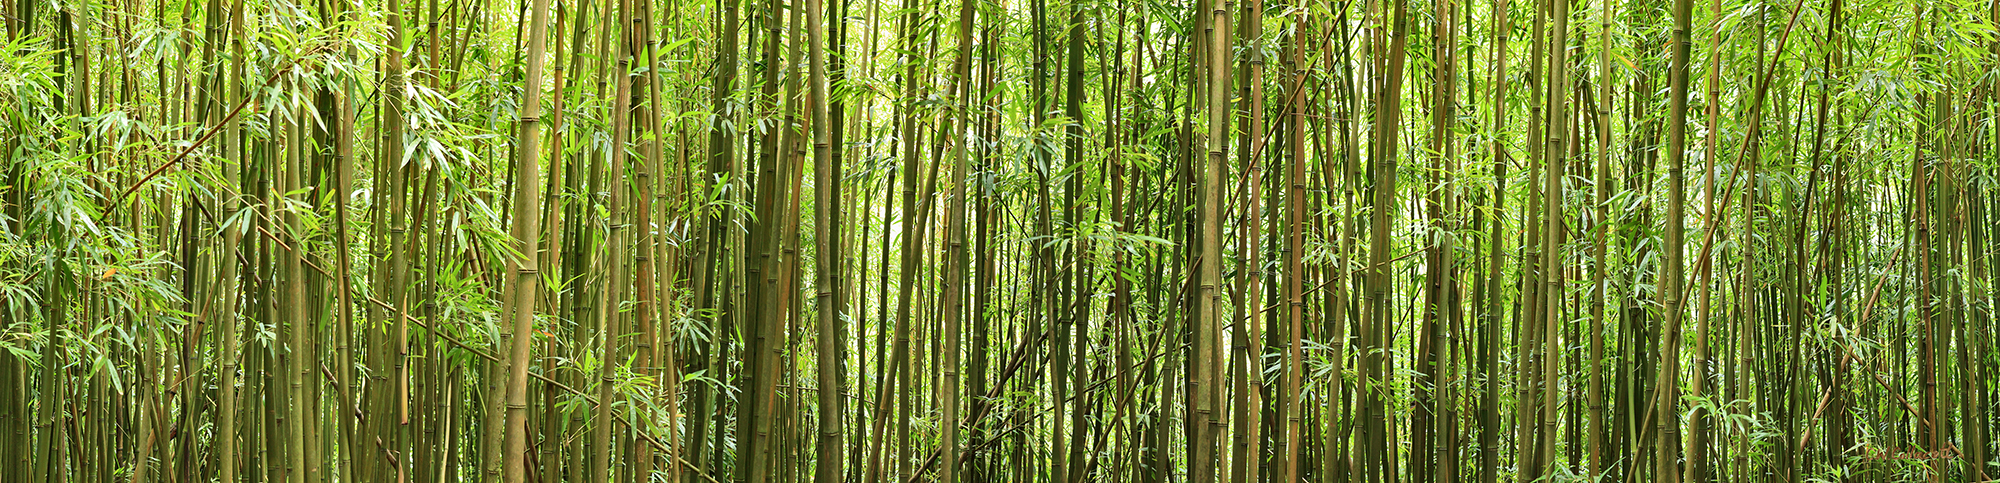 High-Resolution-Image-of-a-Bamboo-Forest-Hawaii-USA